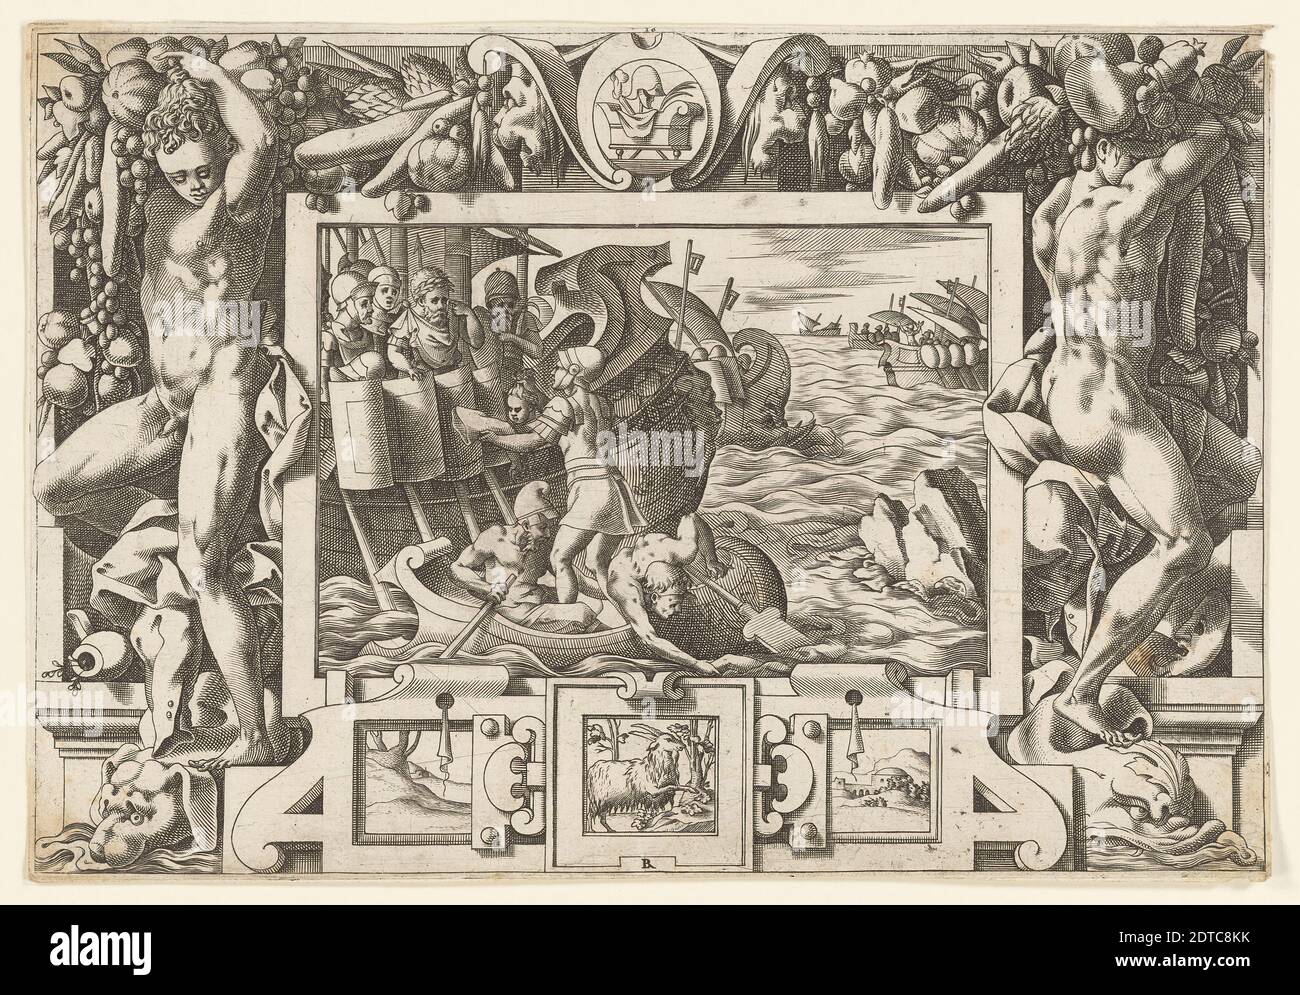 Engraver: René Boyvin, French, ca. 1525–1598, After: Leonard Thiry, Flemish, active 1536 France, died 1550, Aeetes Accepts the Dismembered Corpse of Absyrte, plate 16 from The Story of Jason and The Conquest of The Golden Fleece, Engraving, platemark: 15.9 × 23.1 cm (6 1/4 × 9 1/8 in.), This print is from a series of twenty-six engravings that depict some of the climactic moments in the story of Jason and the Golden Fleece. The compositions and framing elements of this series demonstrate the influence of the decoration of the Gallery of Francis I—particularly the stucco work—on later artists Stock Photo